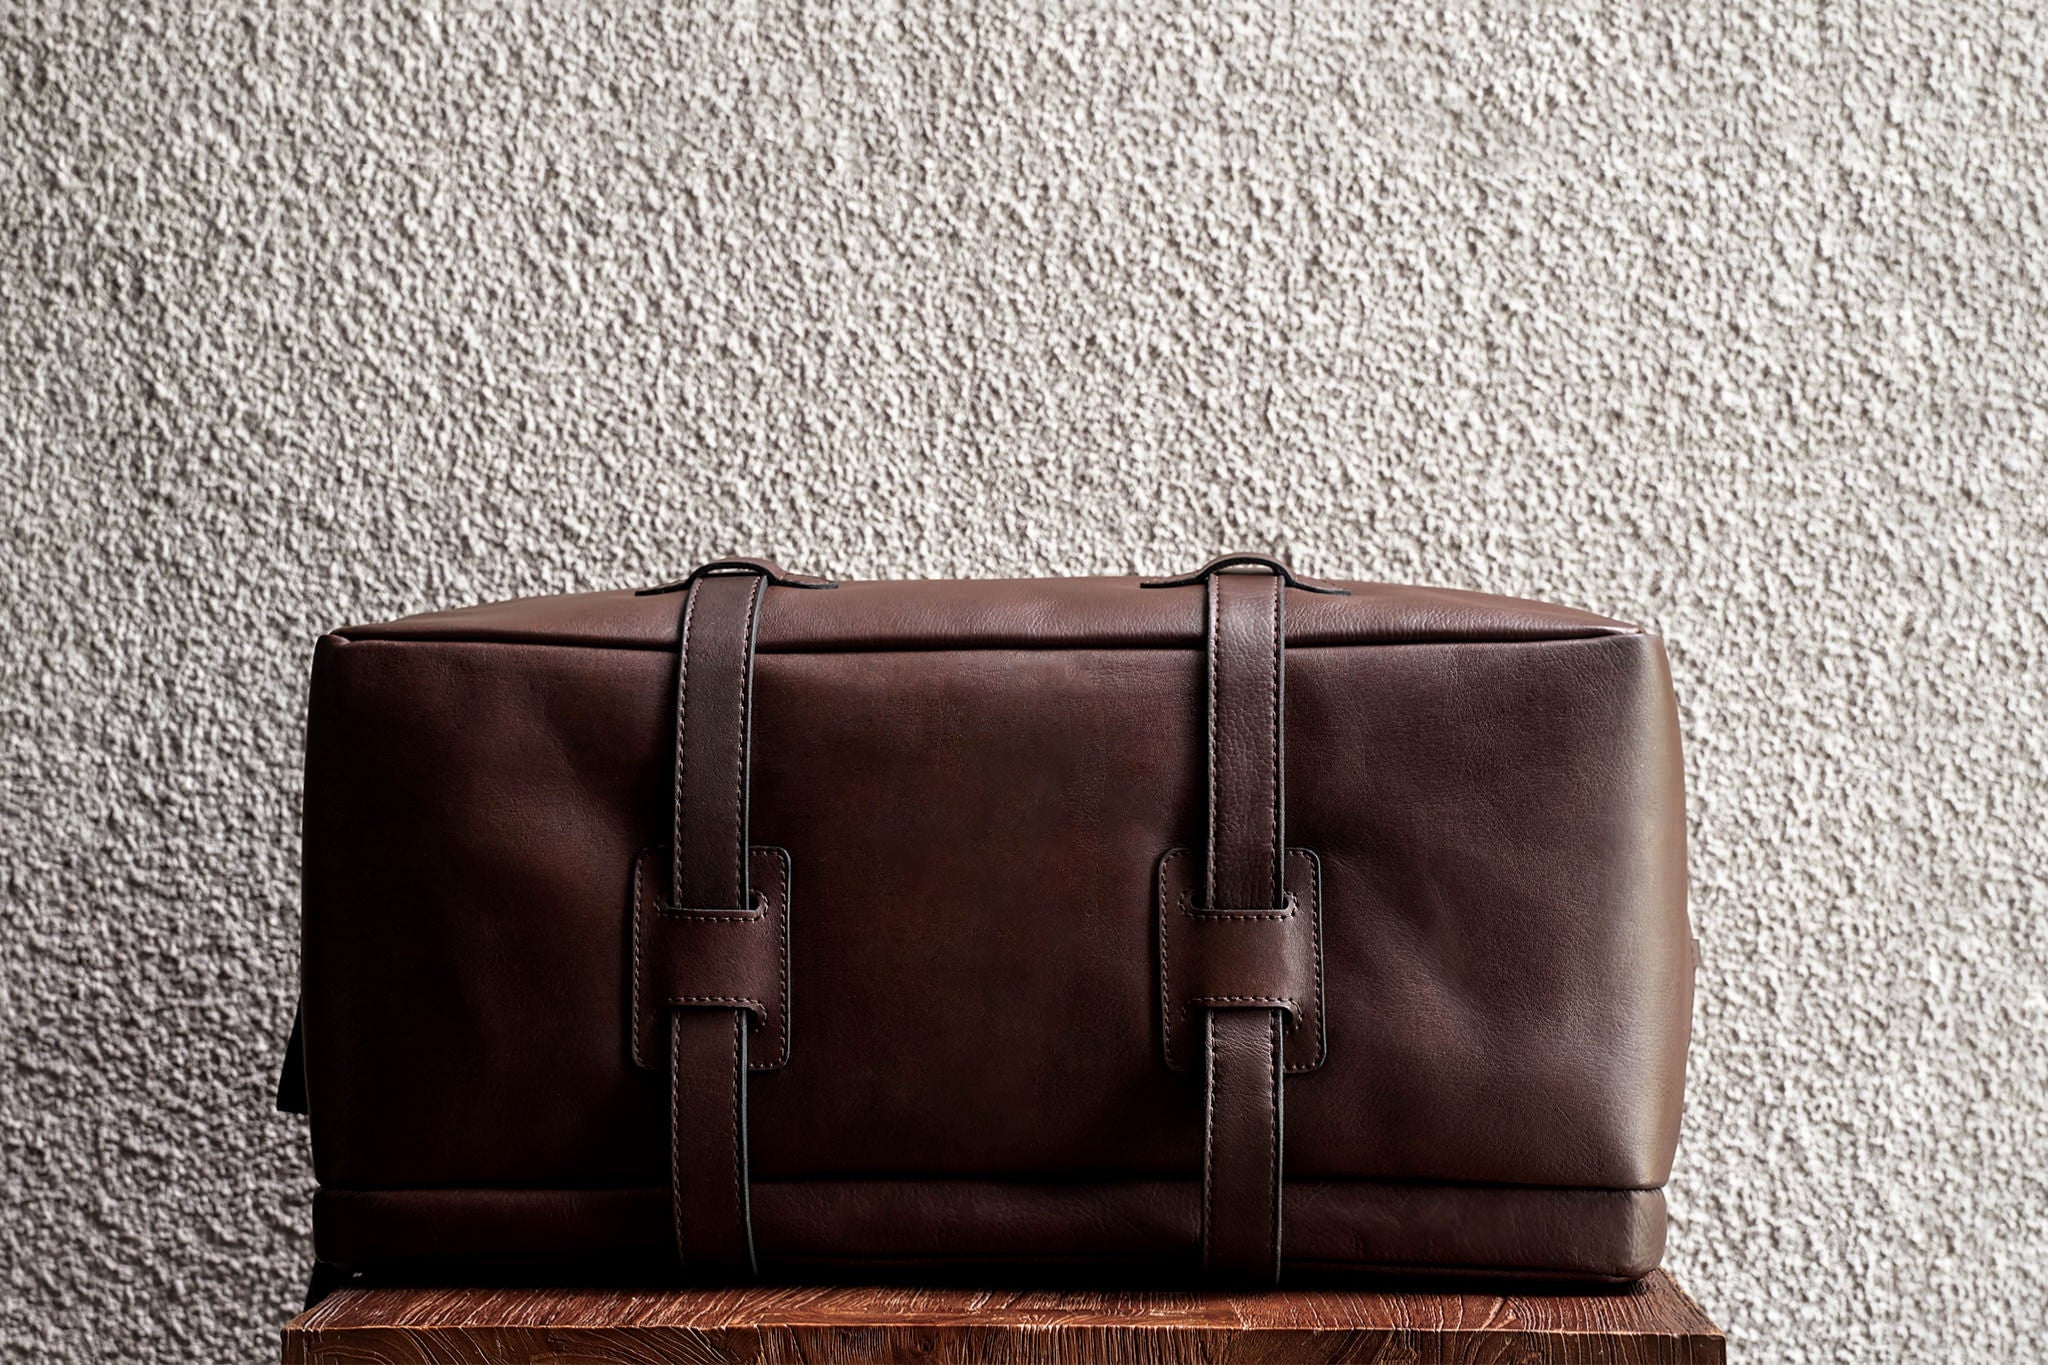 One of our signature design cues, the body straps go all around the bag, providing a load bearing structure for the bag. A big piece of leather on the bottom adds to the durability of the bag.